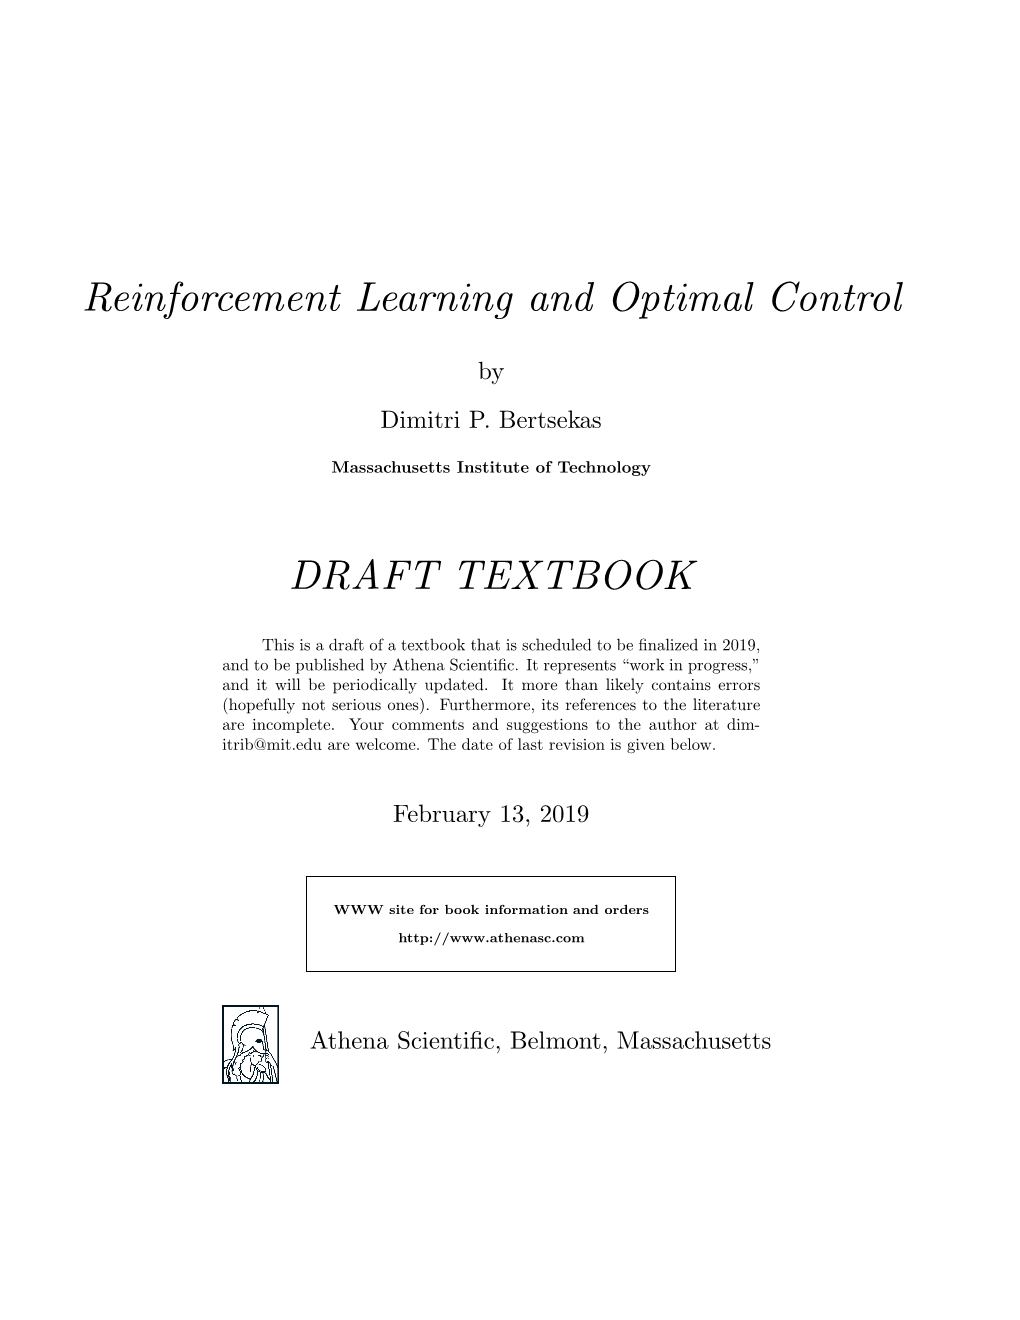 Reinforcement Learning and Optimal Control DRAFT TEXTBOOK